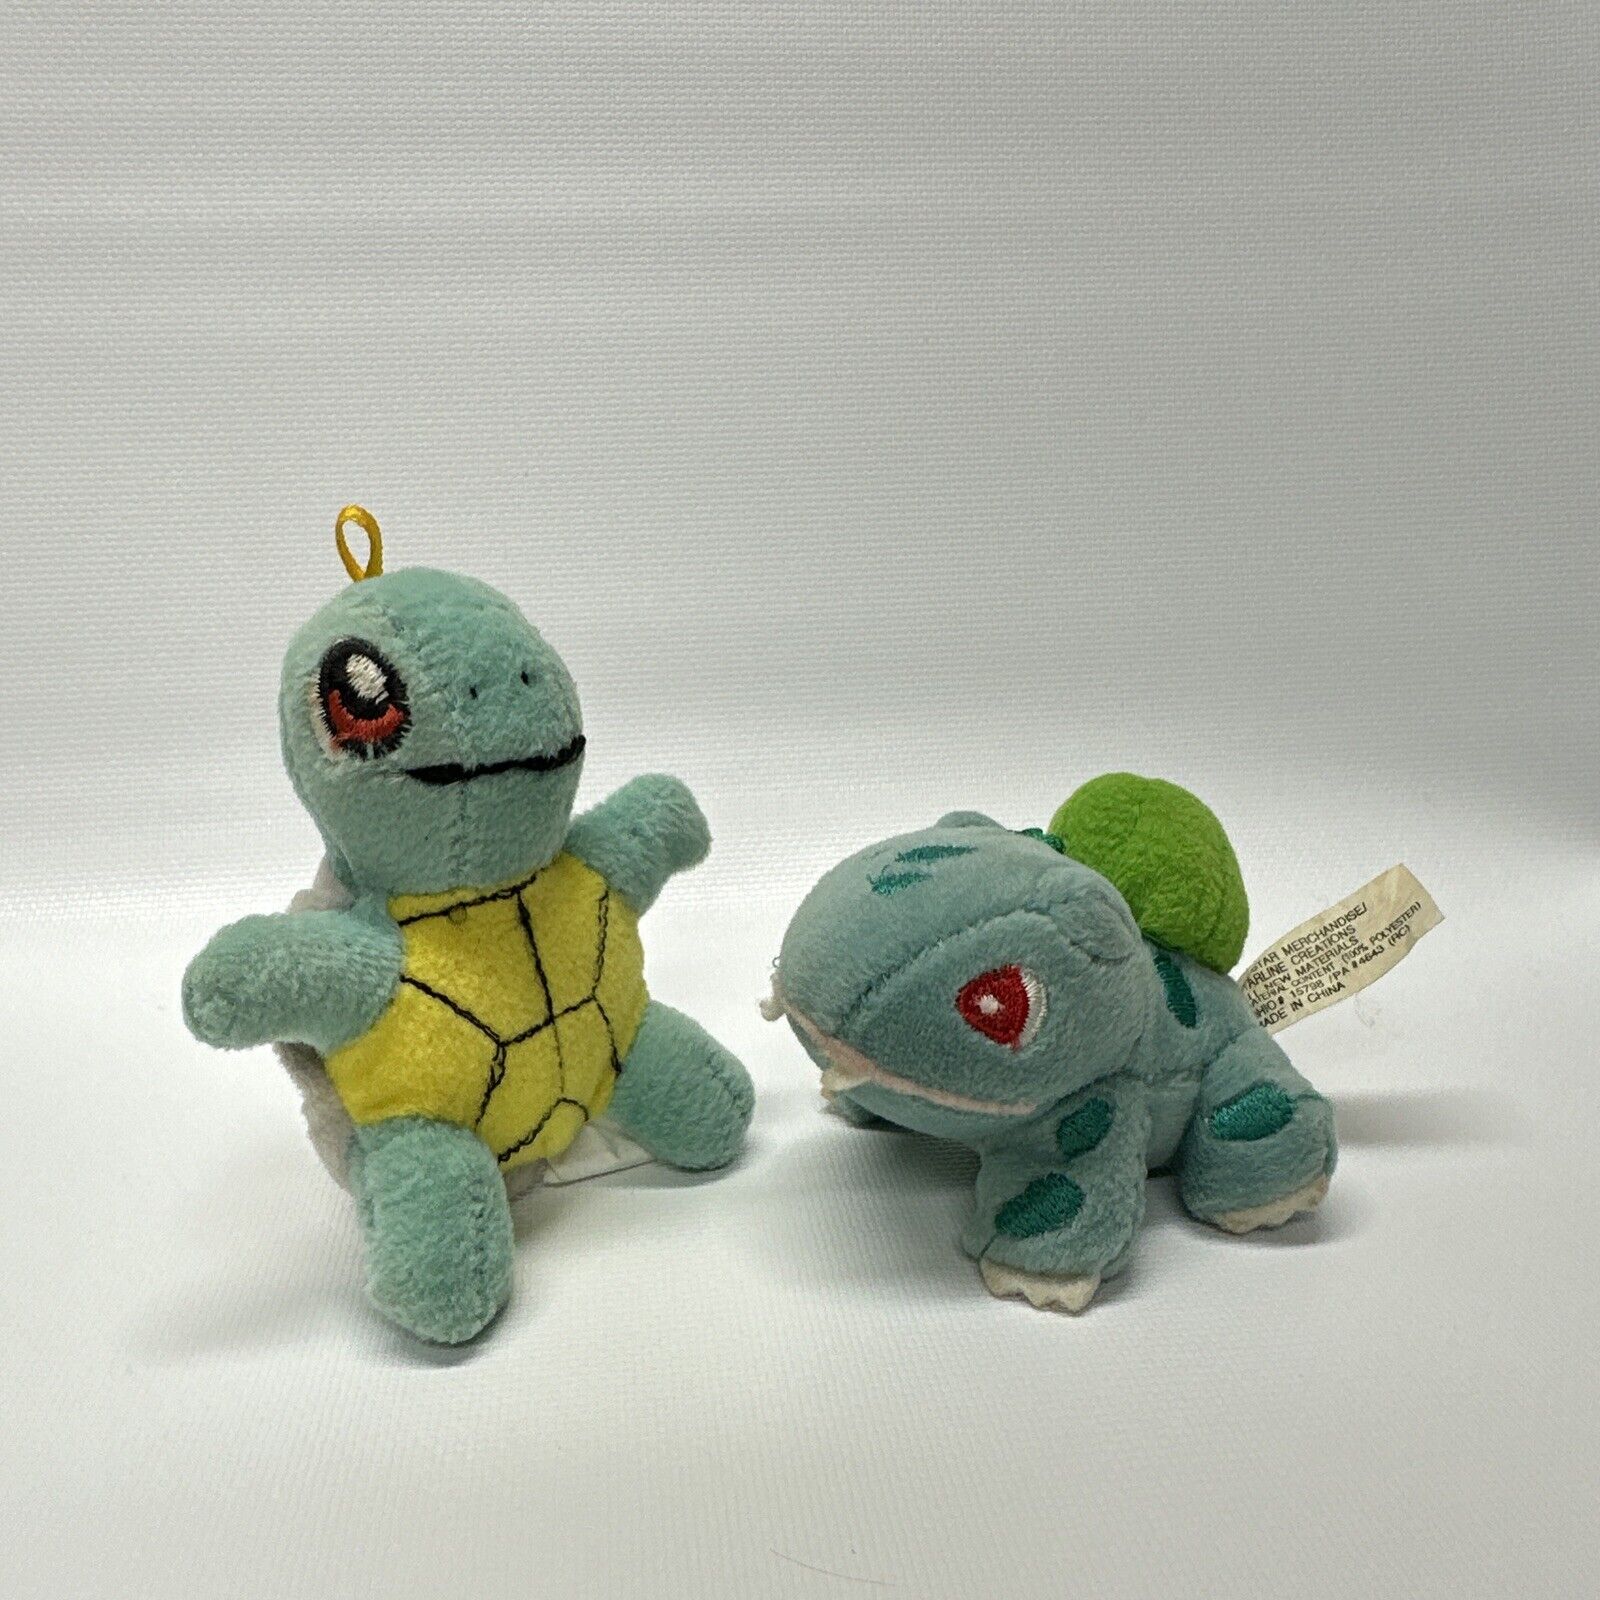 Squirtle and Bulbasaur Pokémon Plush Small Stuffed Animals Starline Creations